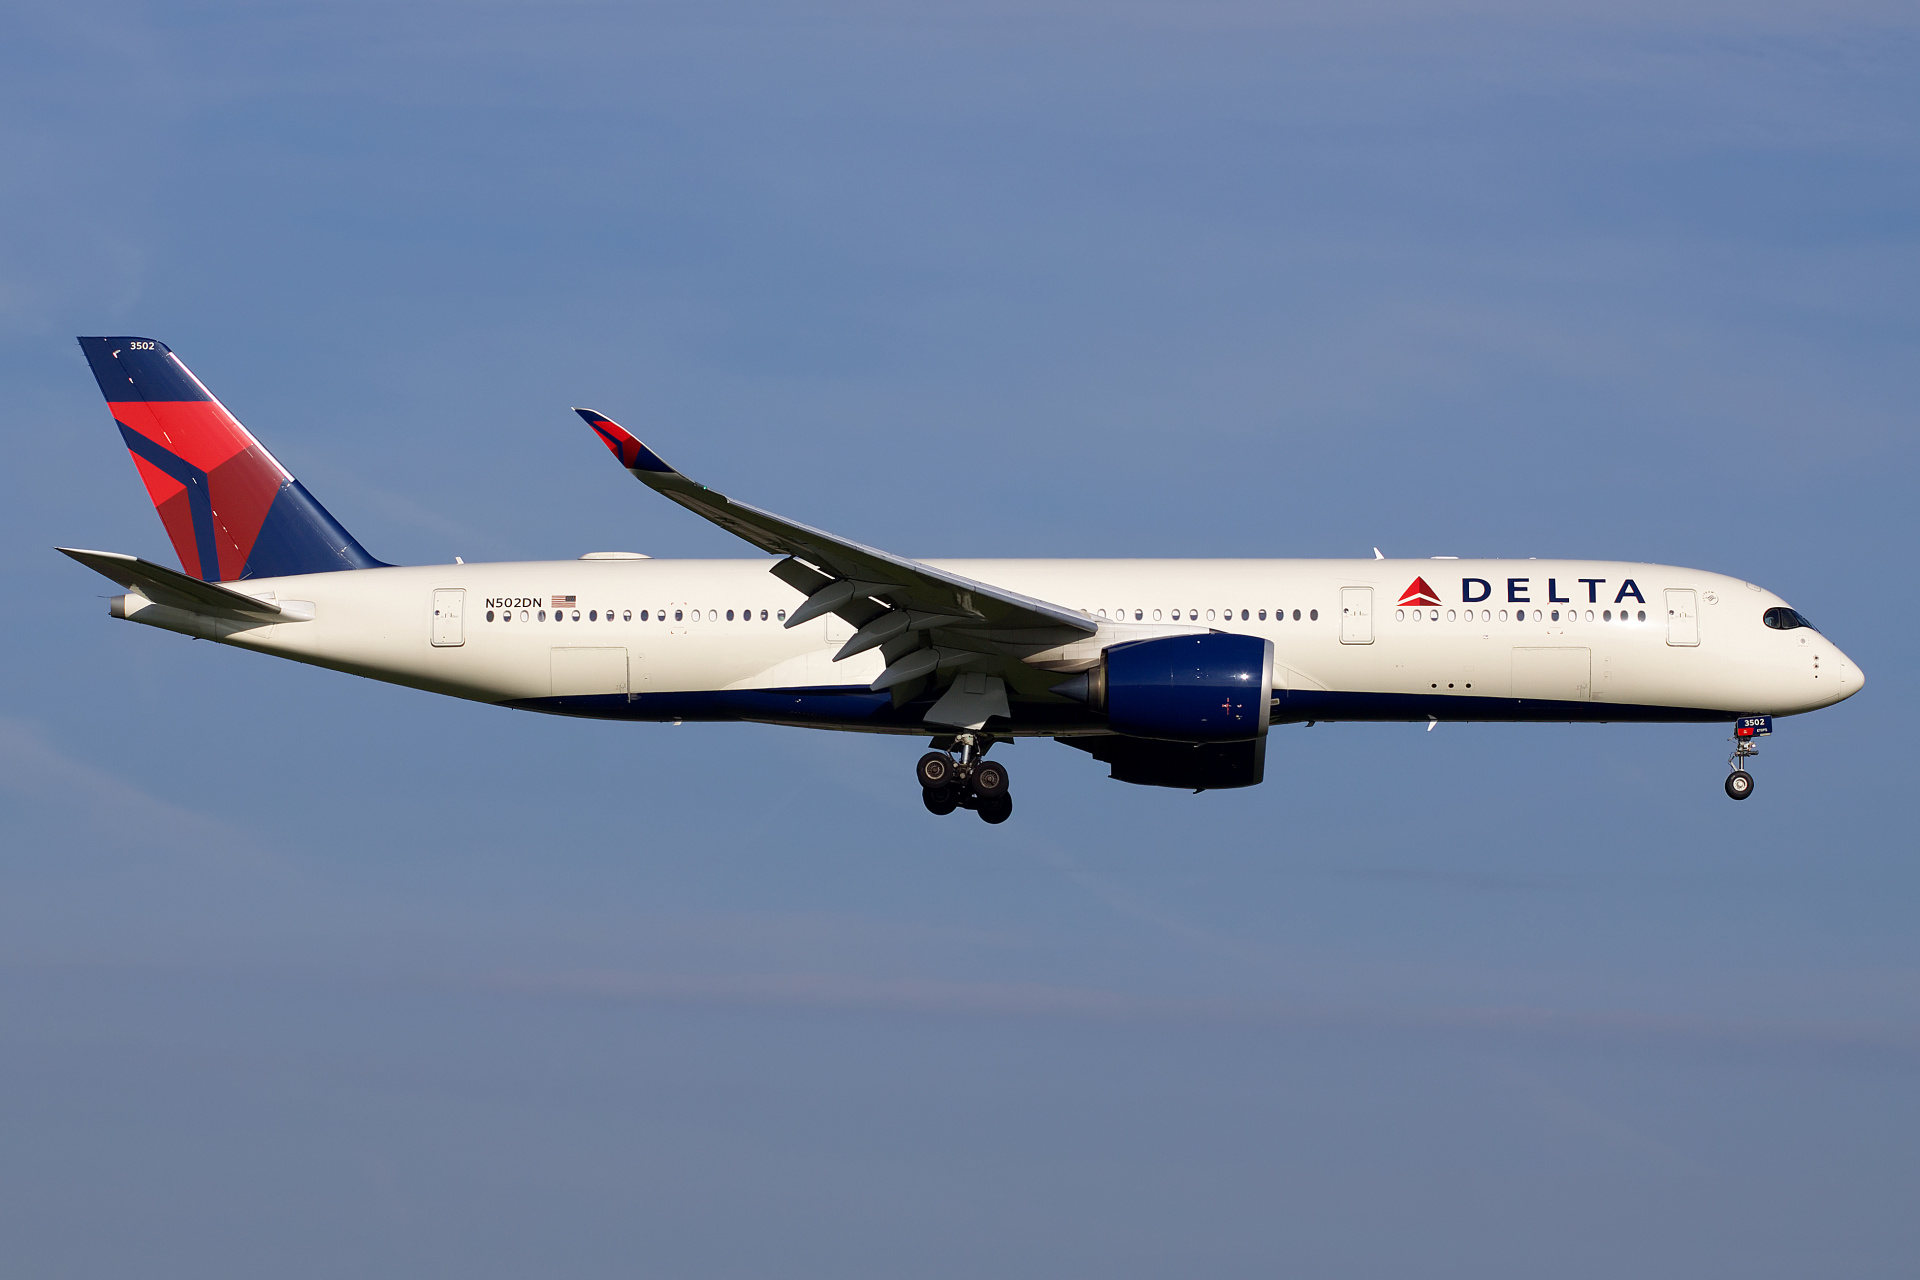 N502DN, Delta Airlines (Aircraft » Schiphol Spotting » Airbus A350-900 » Delta Airlines)